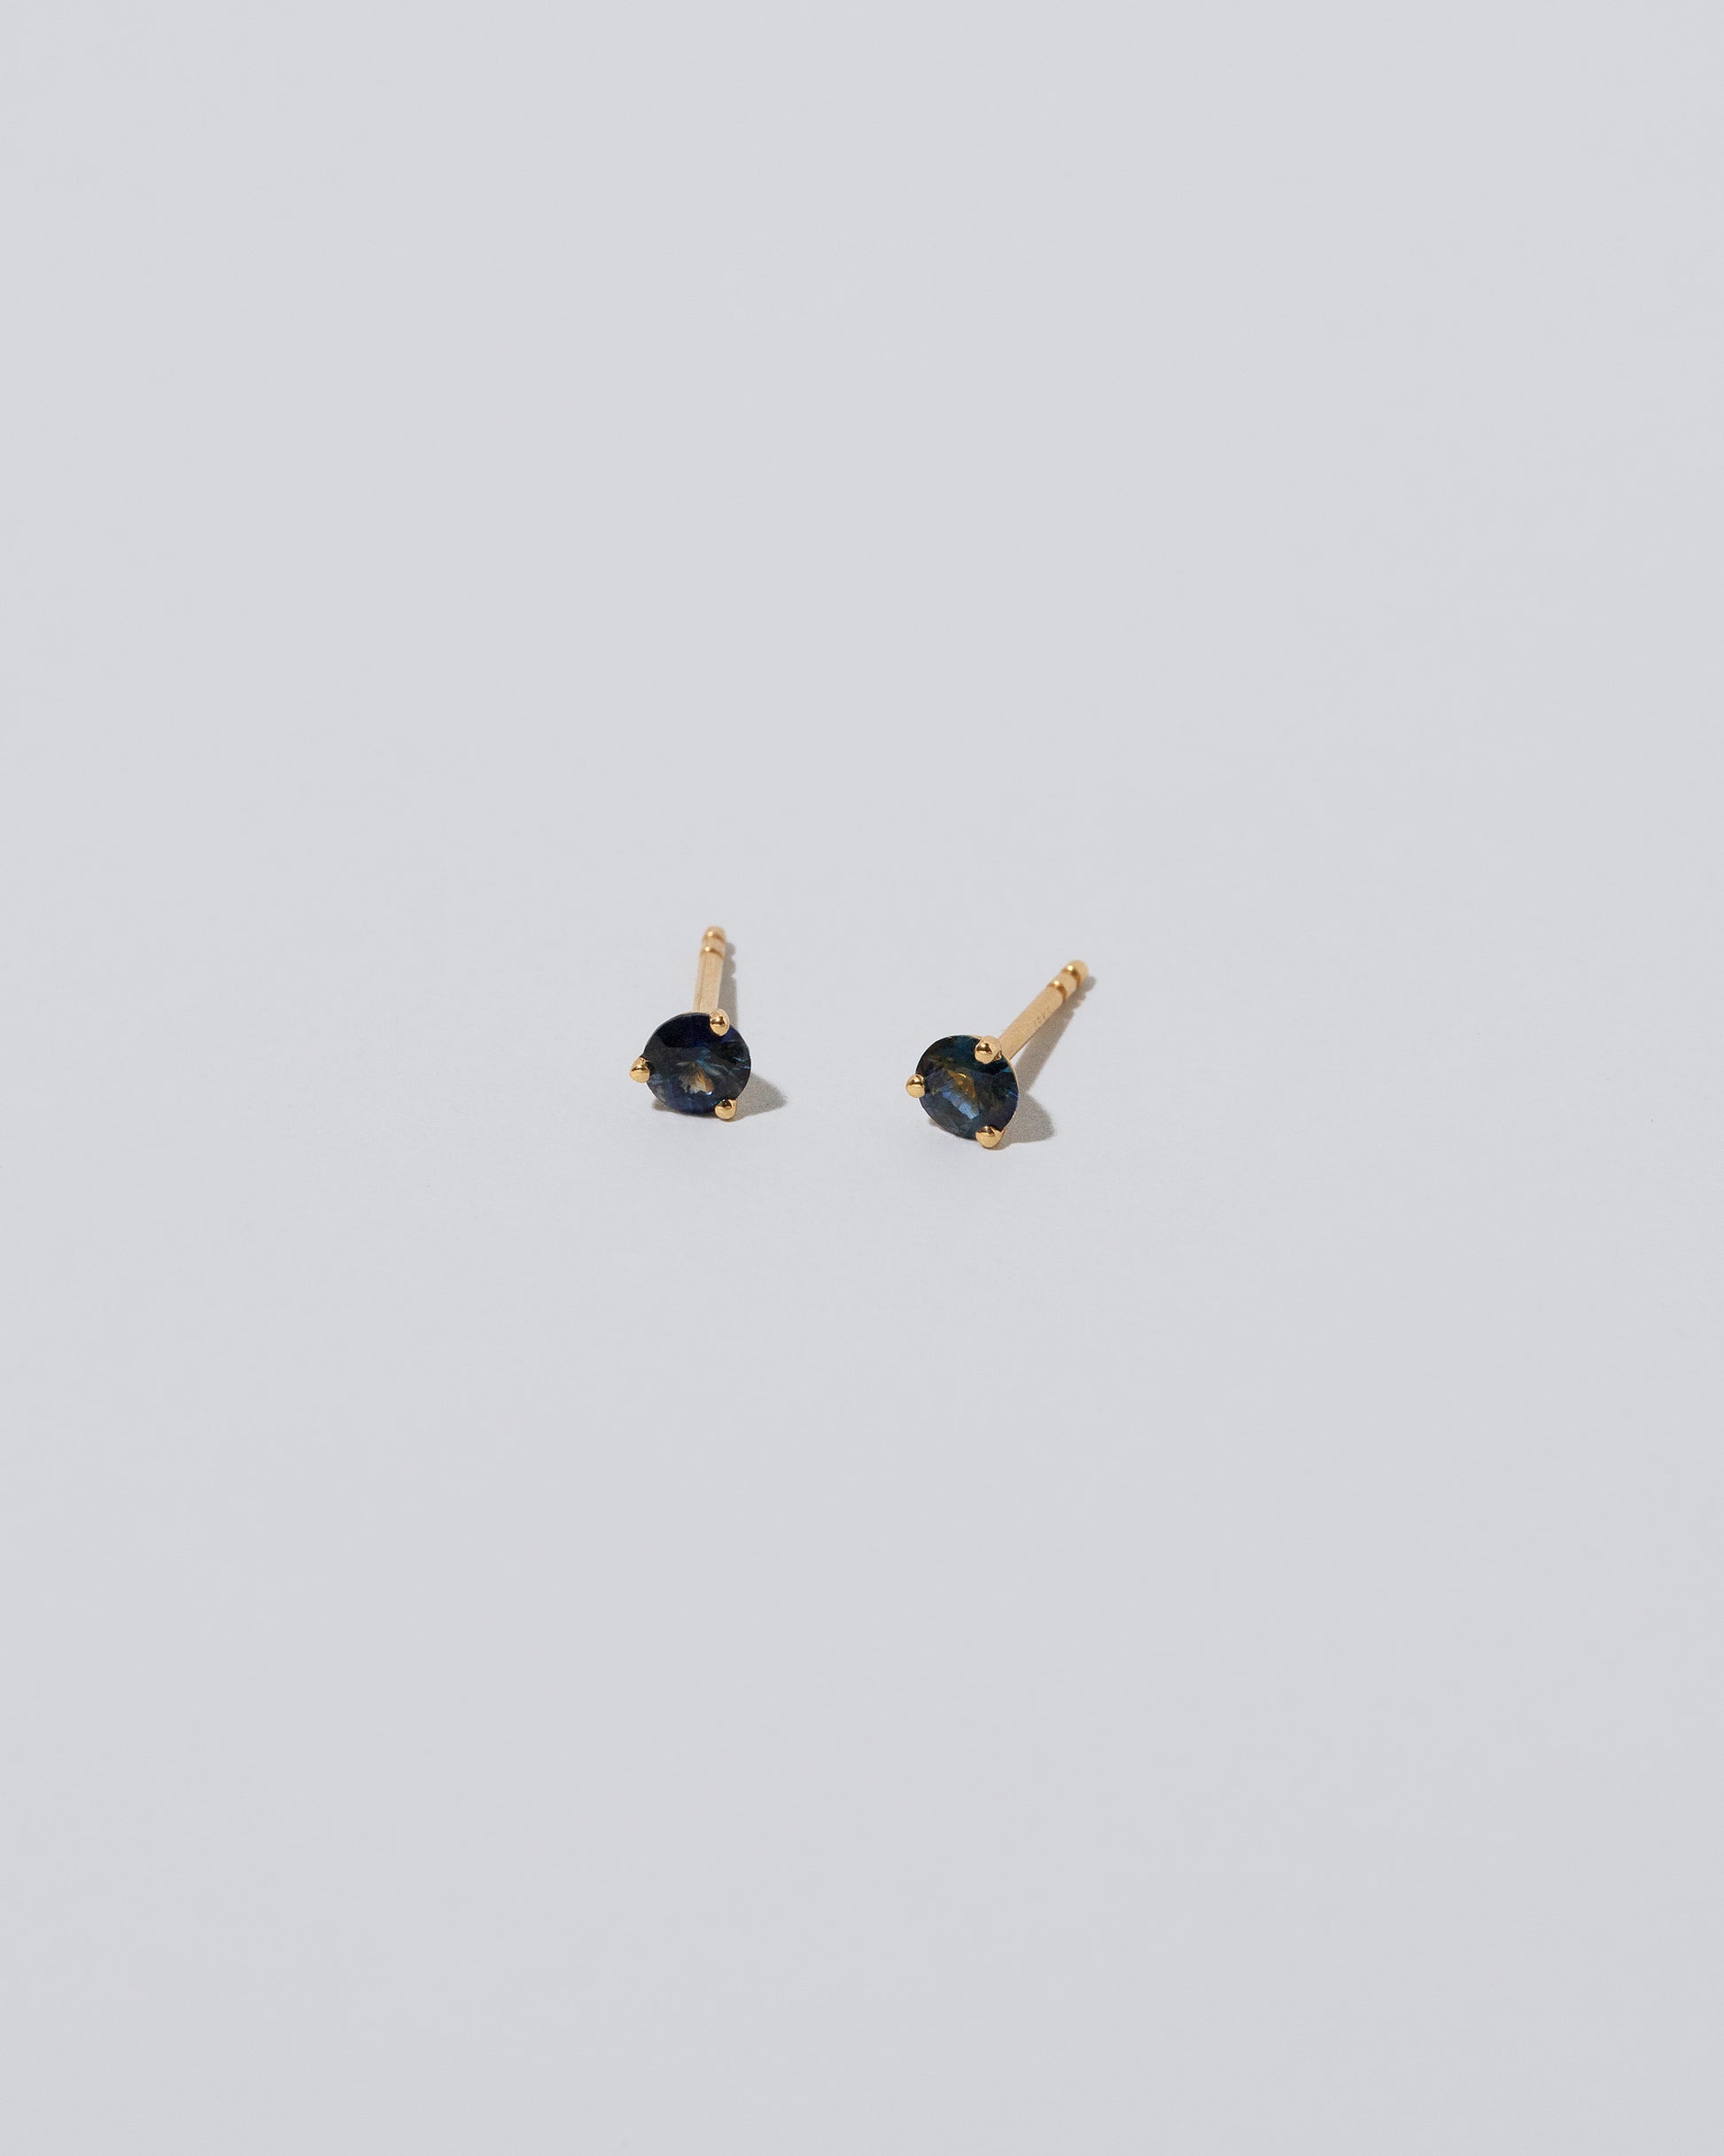 Product photo of Martini Stud Earrings - Blue & Yellow Sapphire on light dolor background. 